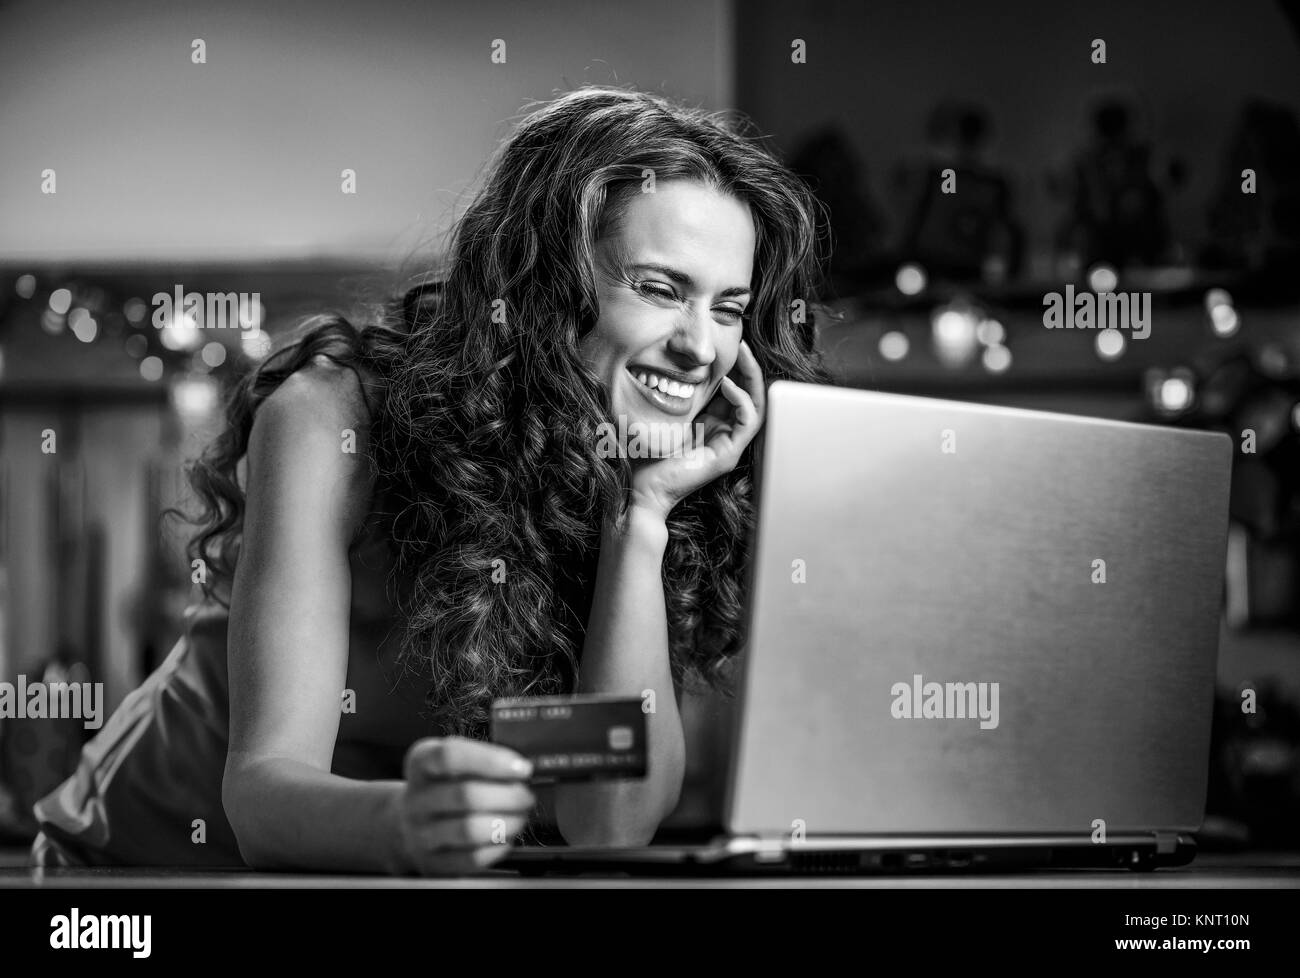 Christmas holidays are a time of gift-giving. Online shopping can make Christmas season less stressful and more enjoyable. Happy young woman holding c Stock Photo